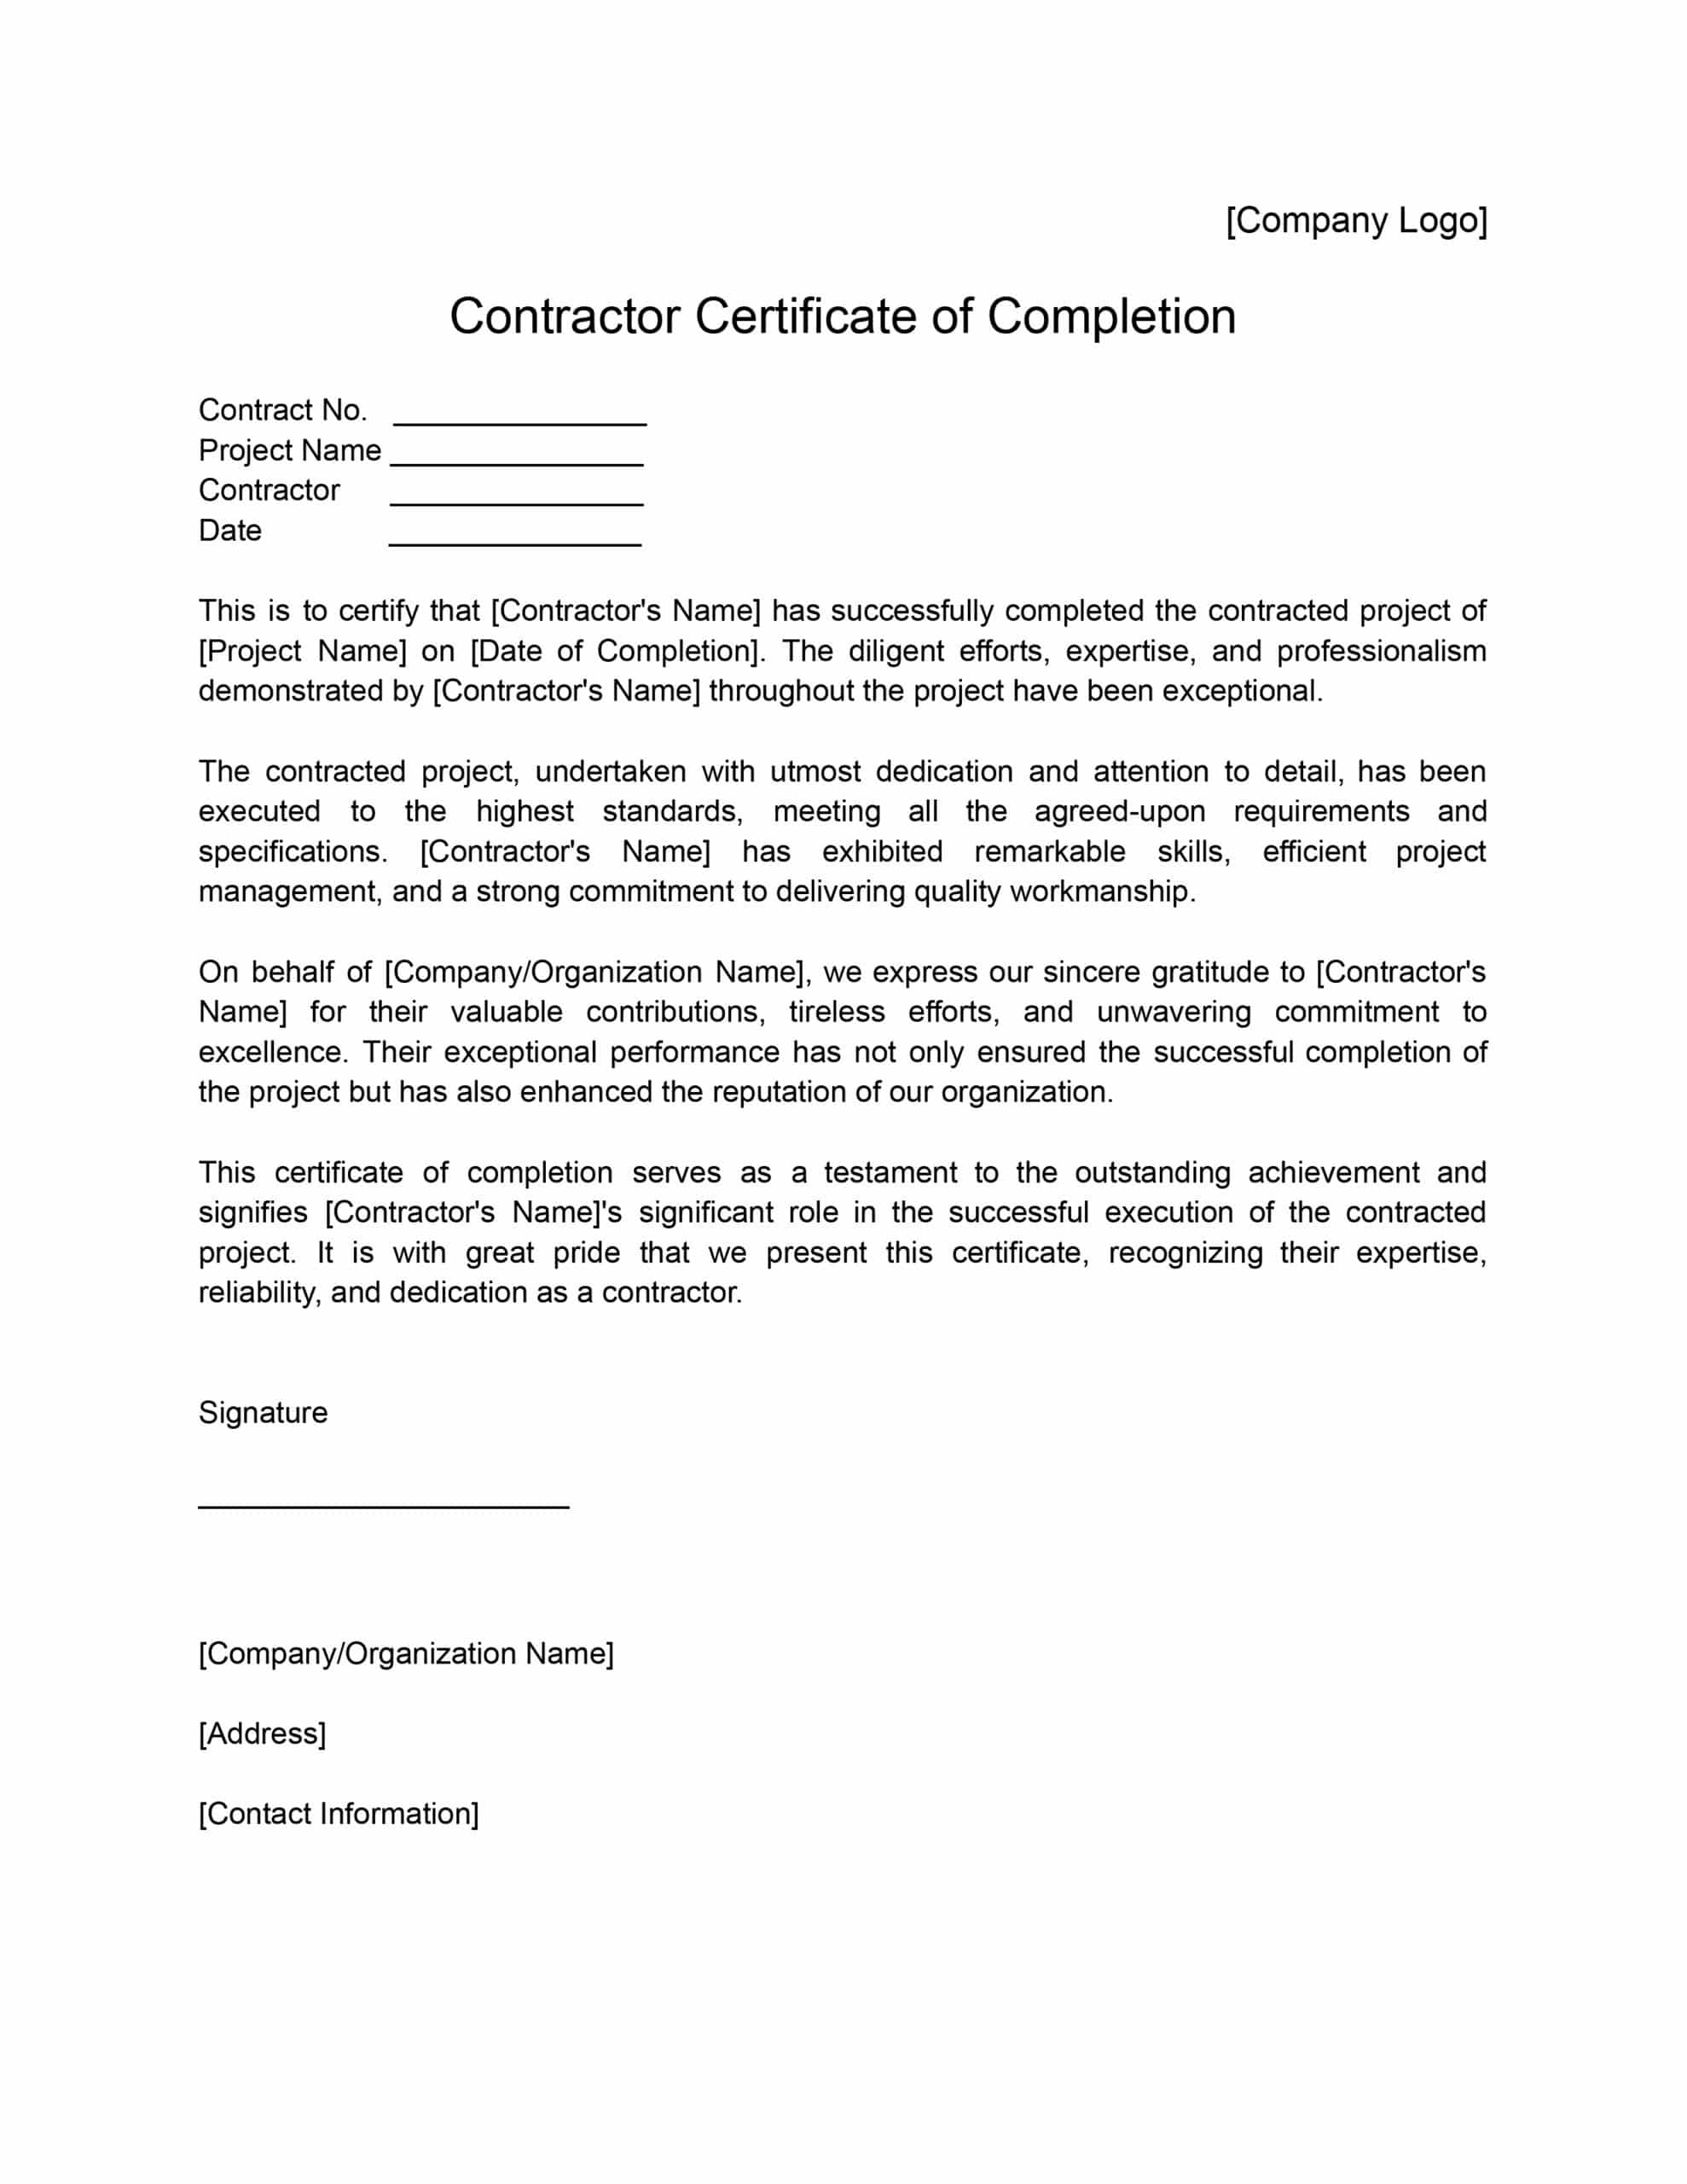 Contractor Certificate of Completion